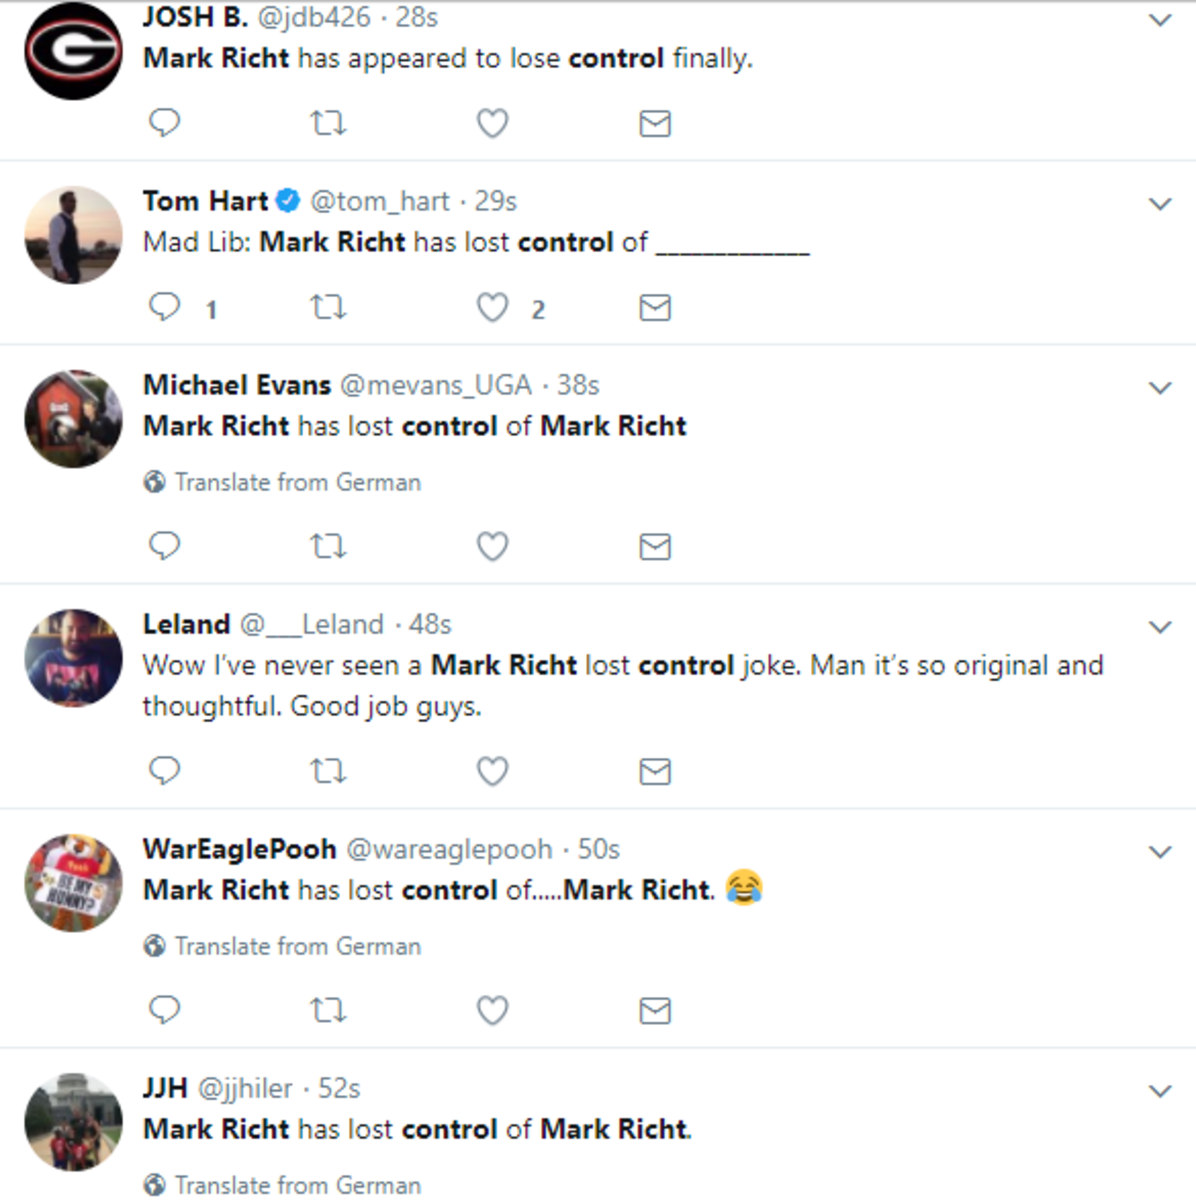 Twitter erupts in "Mark Richt has lost control" jokes after penalty.